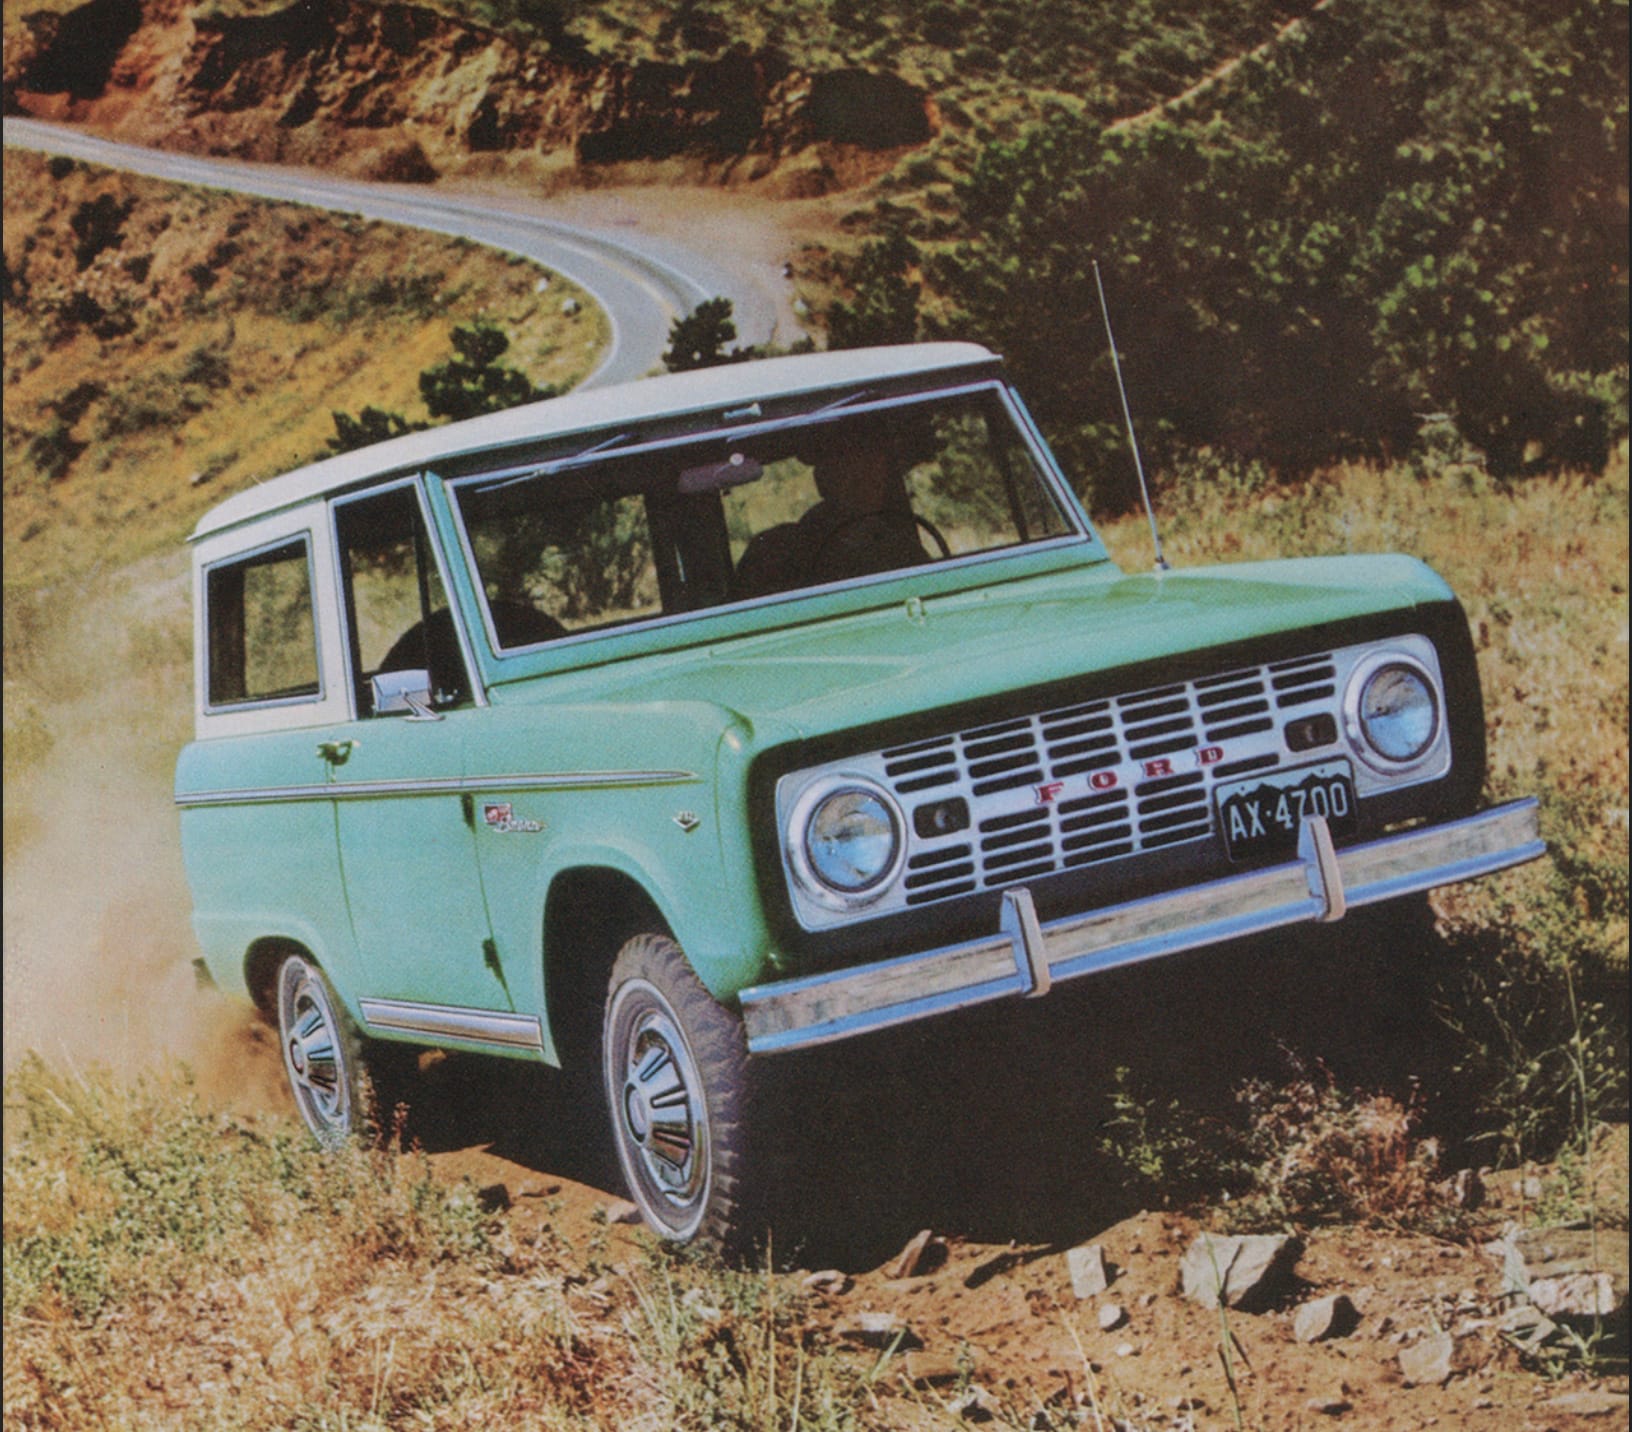 A turquoise 1967 Ford Bronco driving on a rugged dirt trail with a scenic winding road in the background